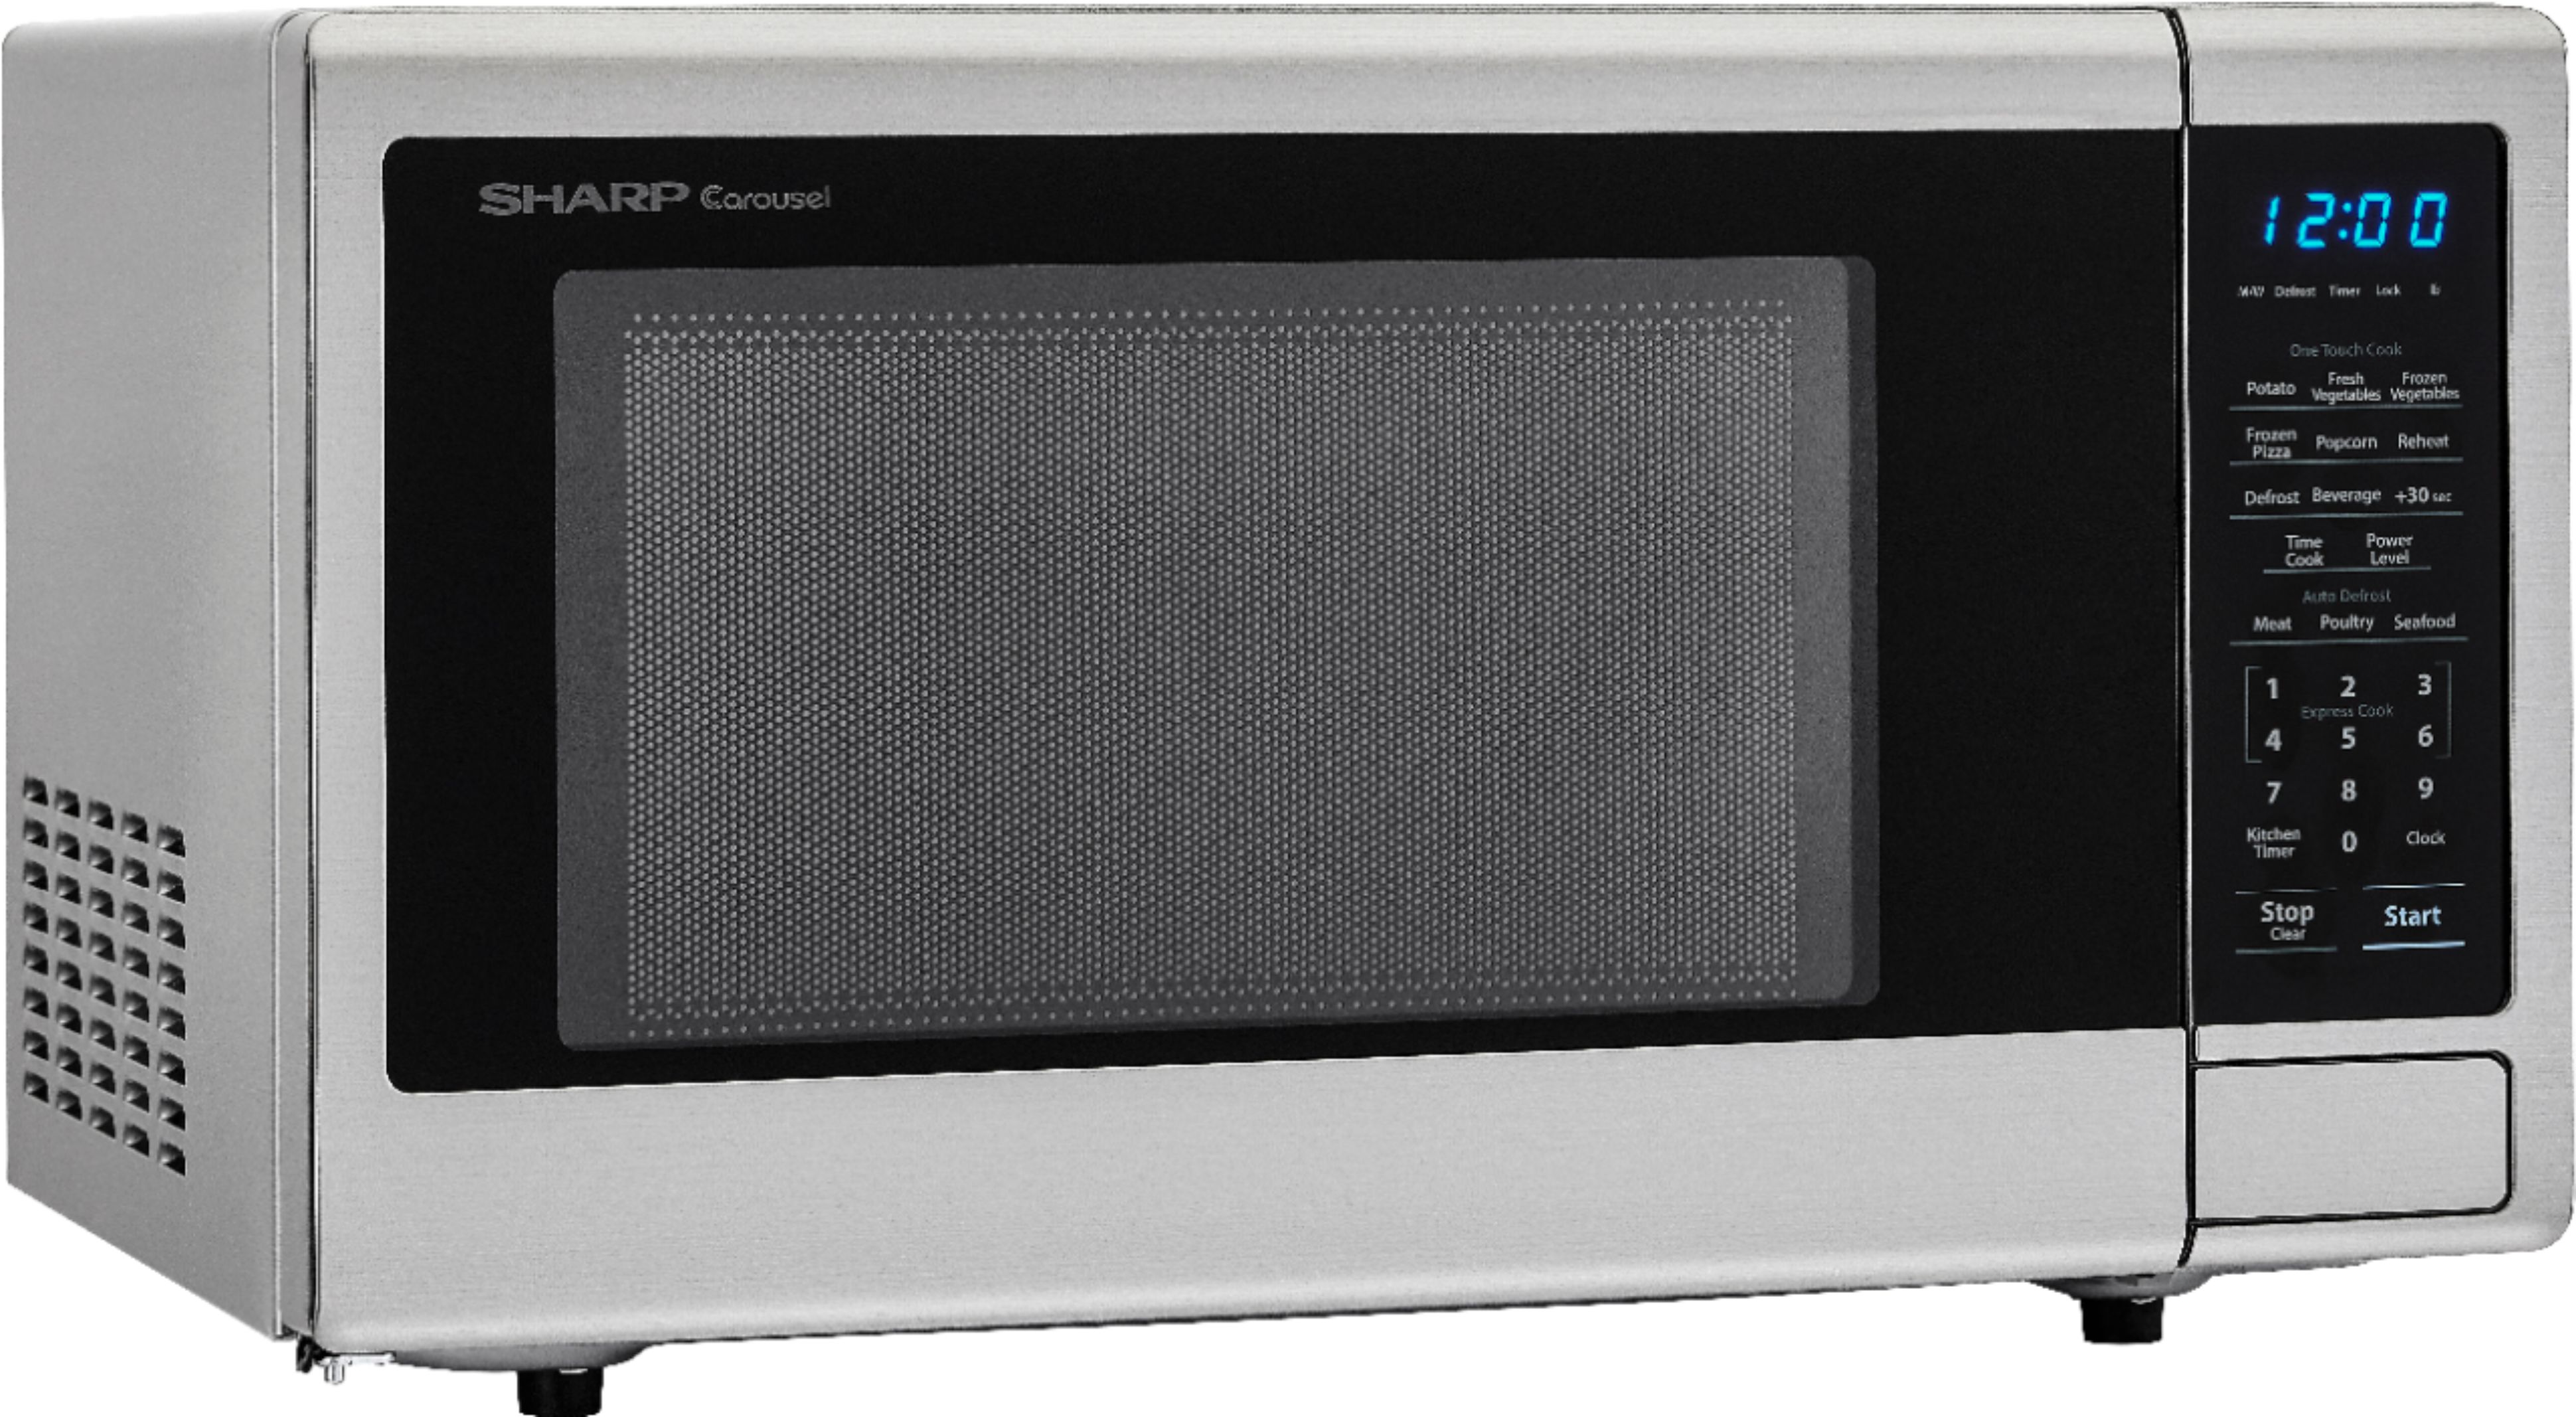 Angle View: Sharp - Carousel 1.8 Cu. Ft. Microwave - Stainless steel